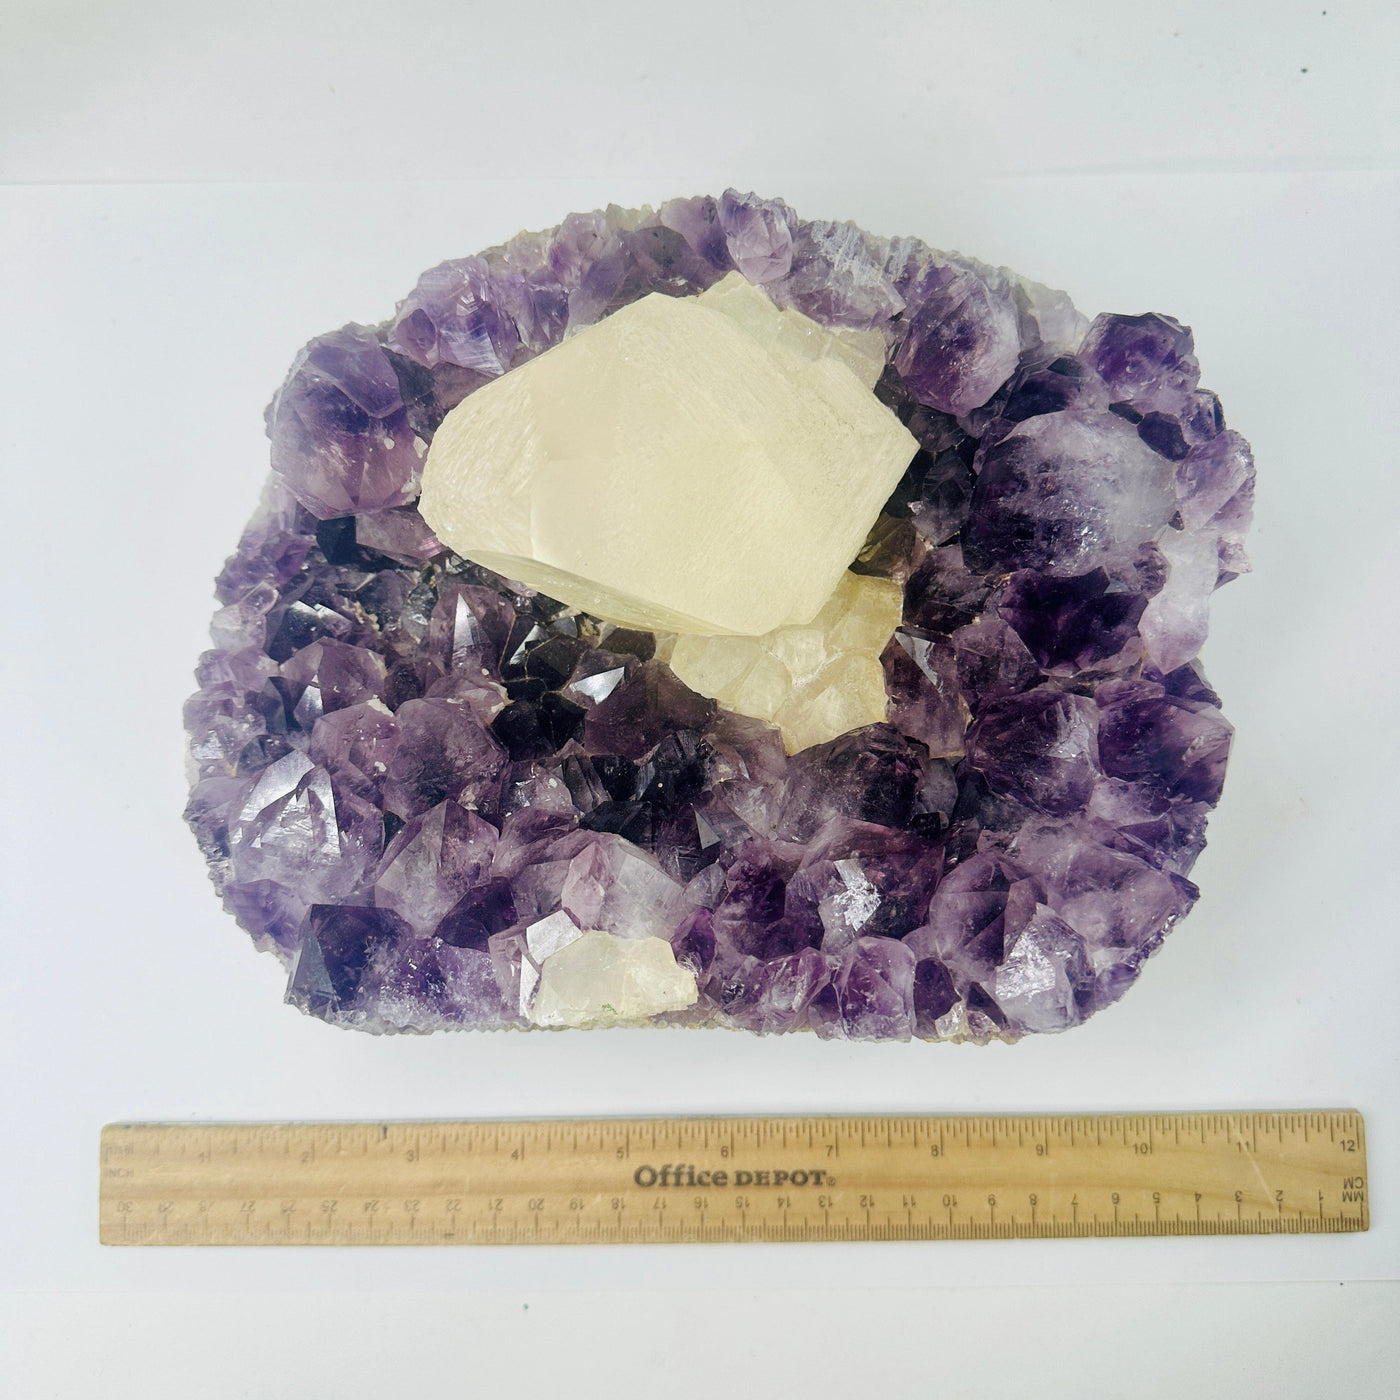 Amethyst Cluster with Crystal Quartz - Large High Quality Amethyst - You Choose variant A with ruler for size reference